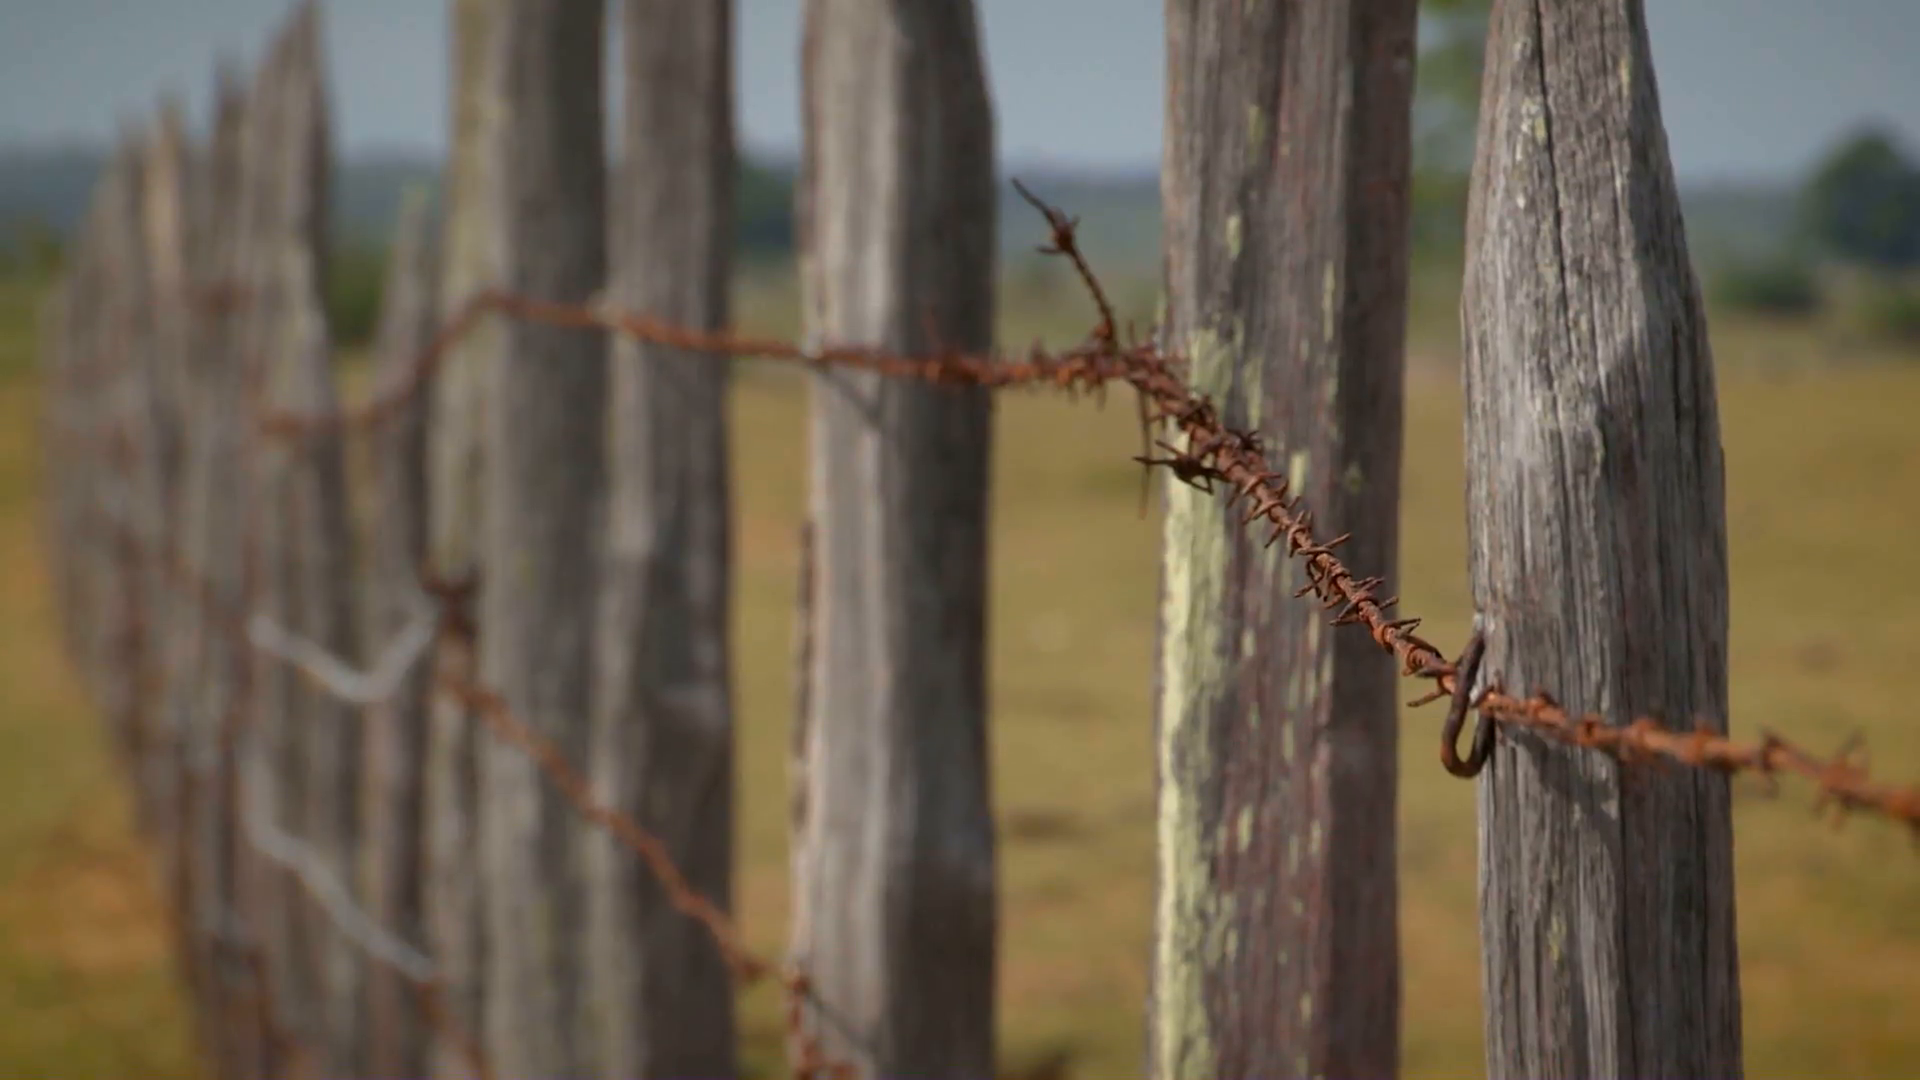 Agriculture barb wire fence. A barbed wire fence and old wooden post ...